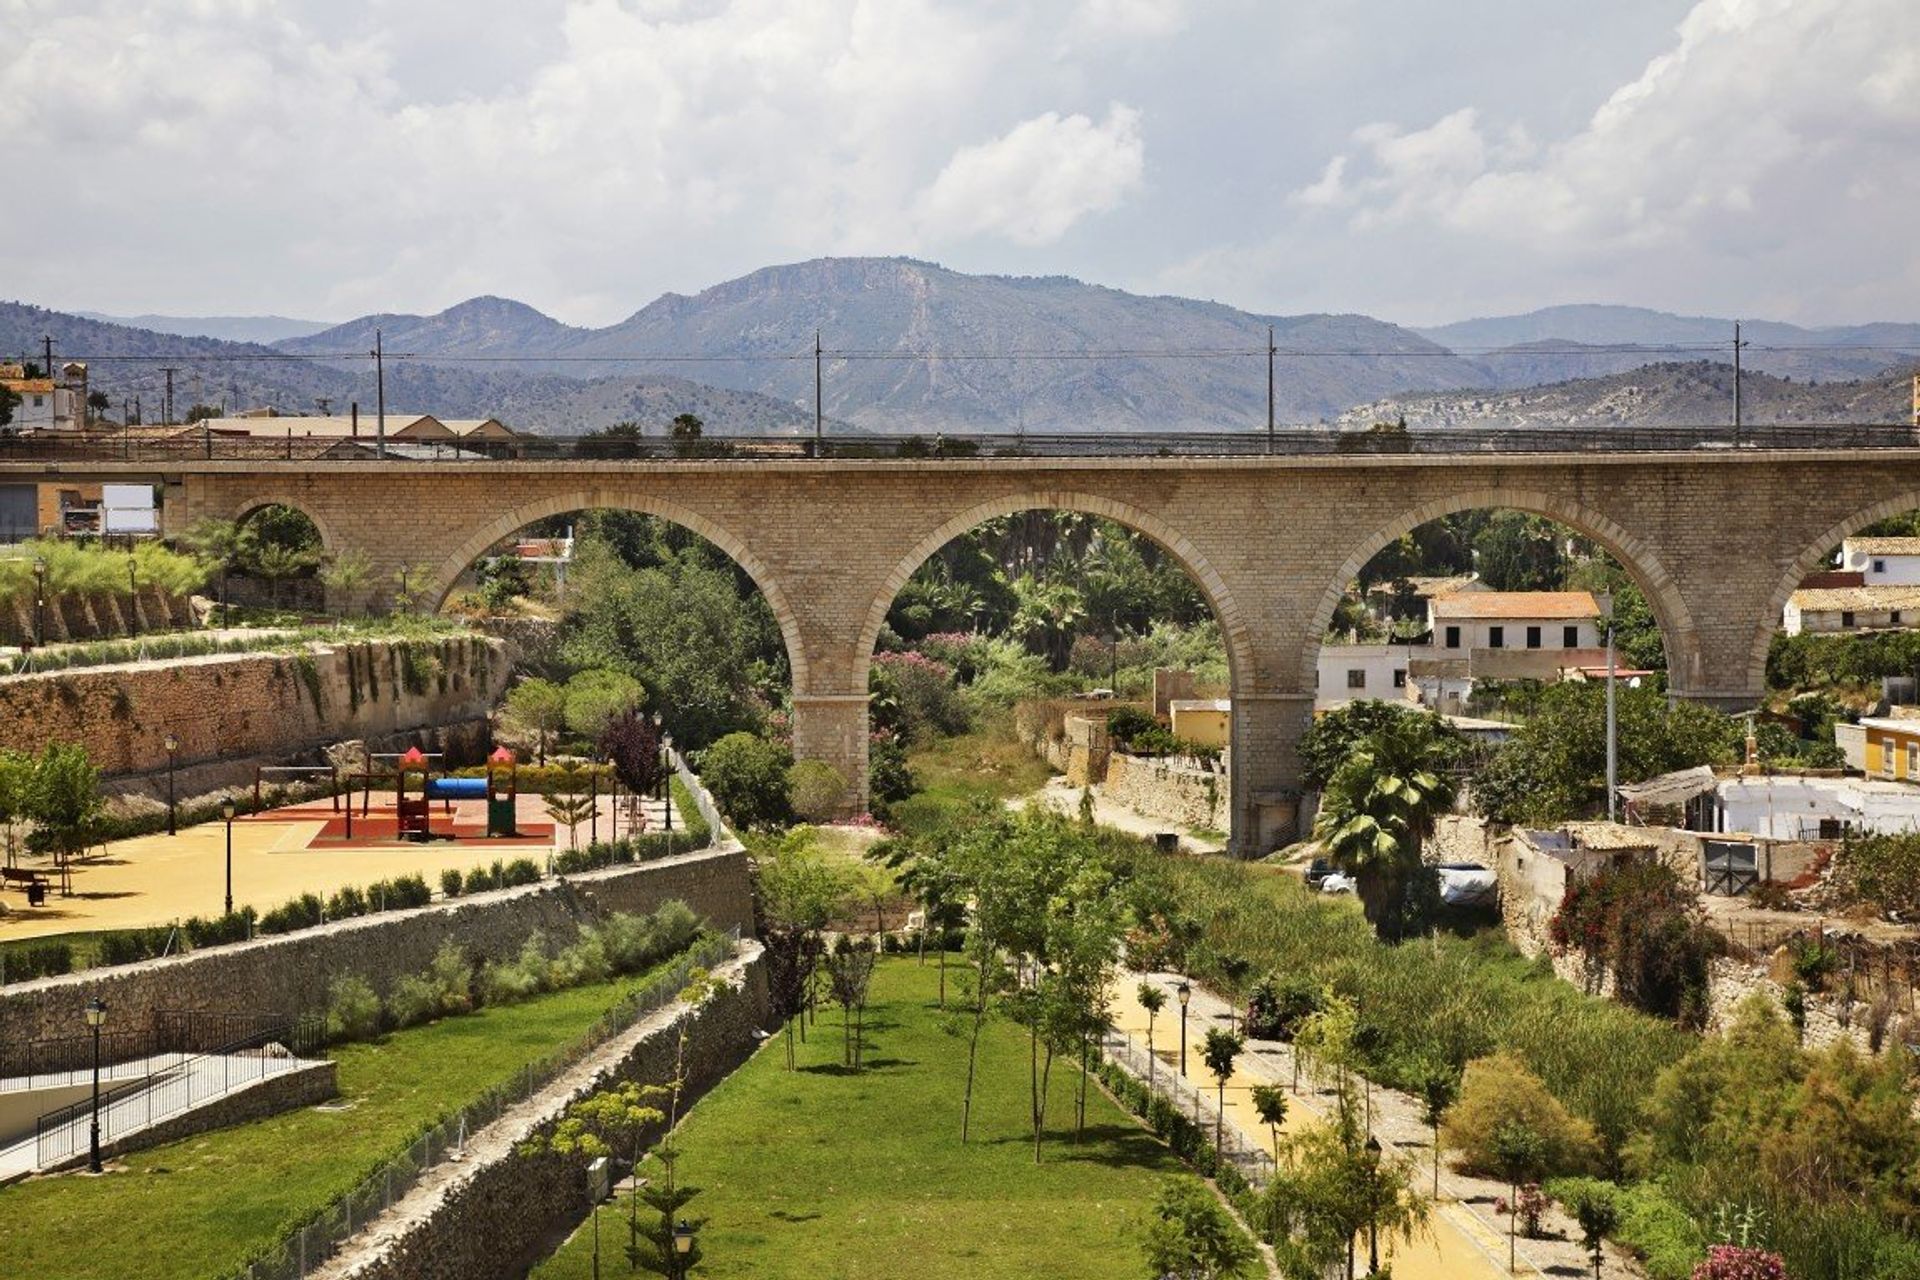 Discover a landscape of mountains and lush greenery, with brilliant views of the old town from Villajoyosa's bridge